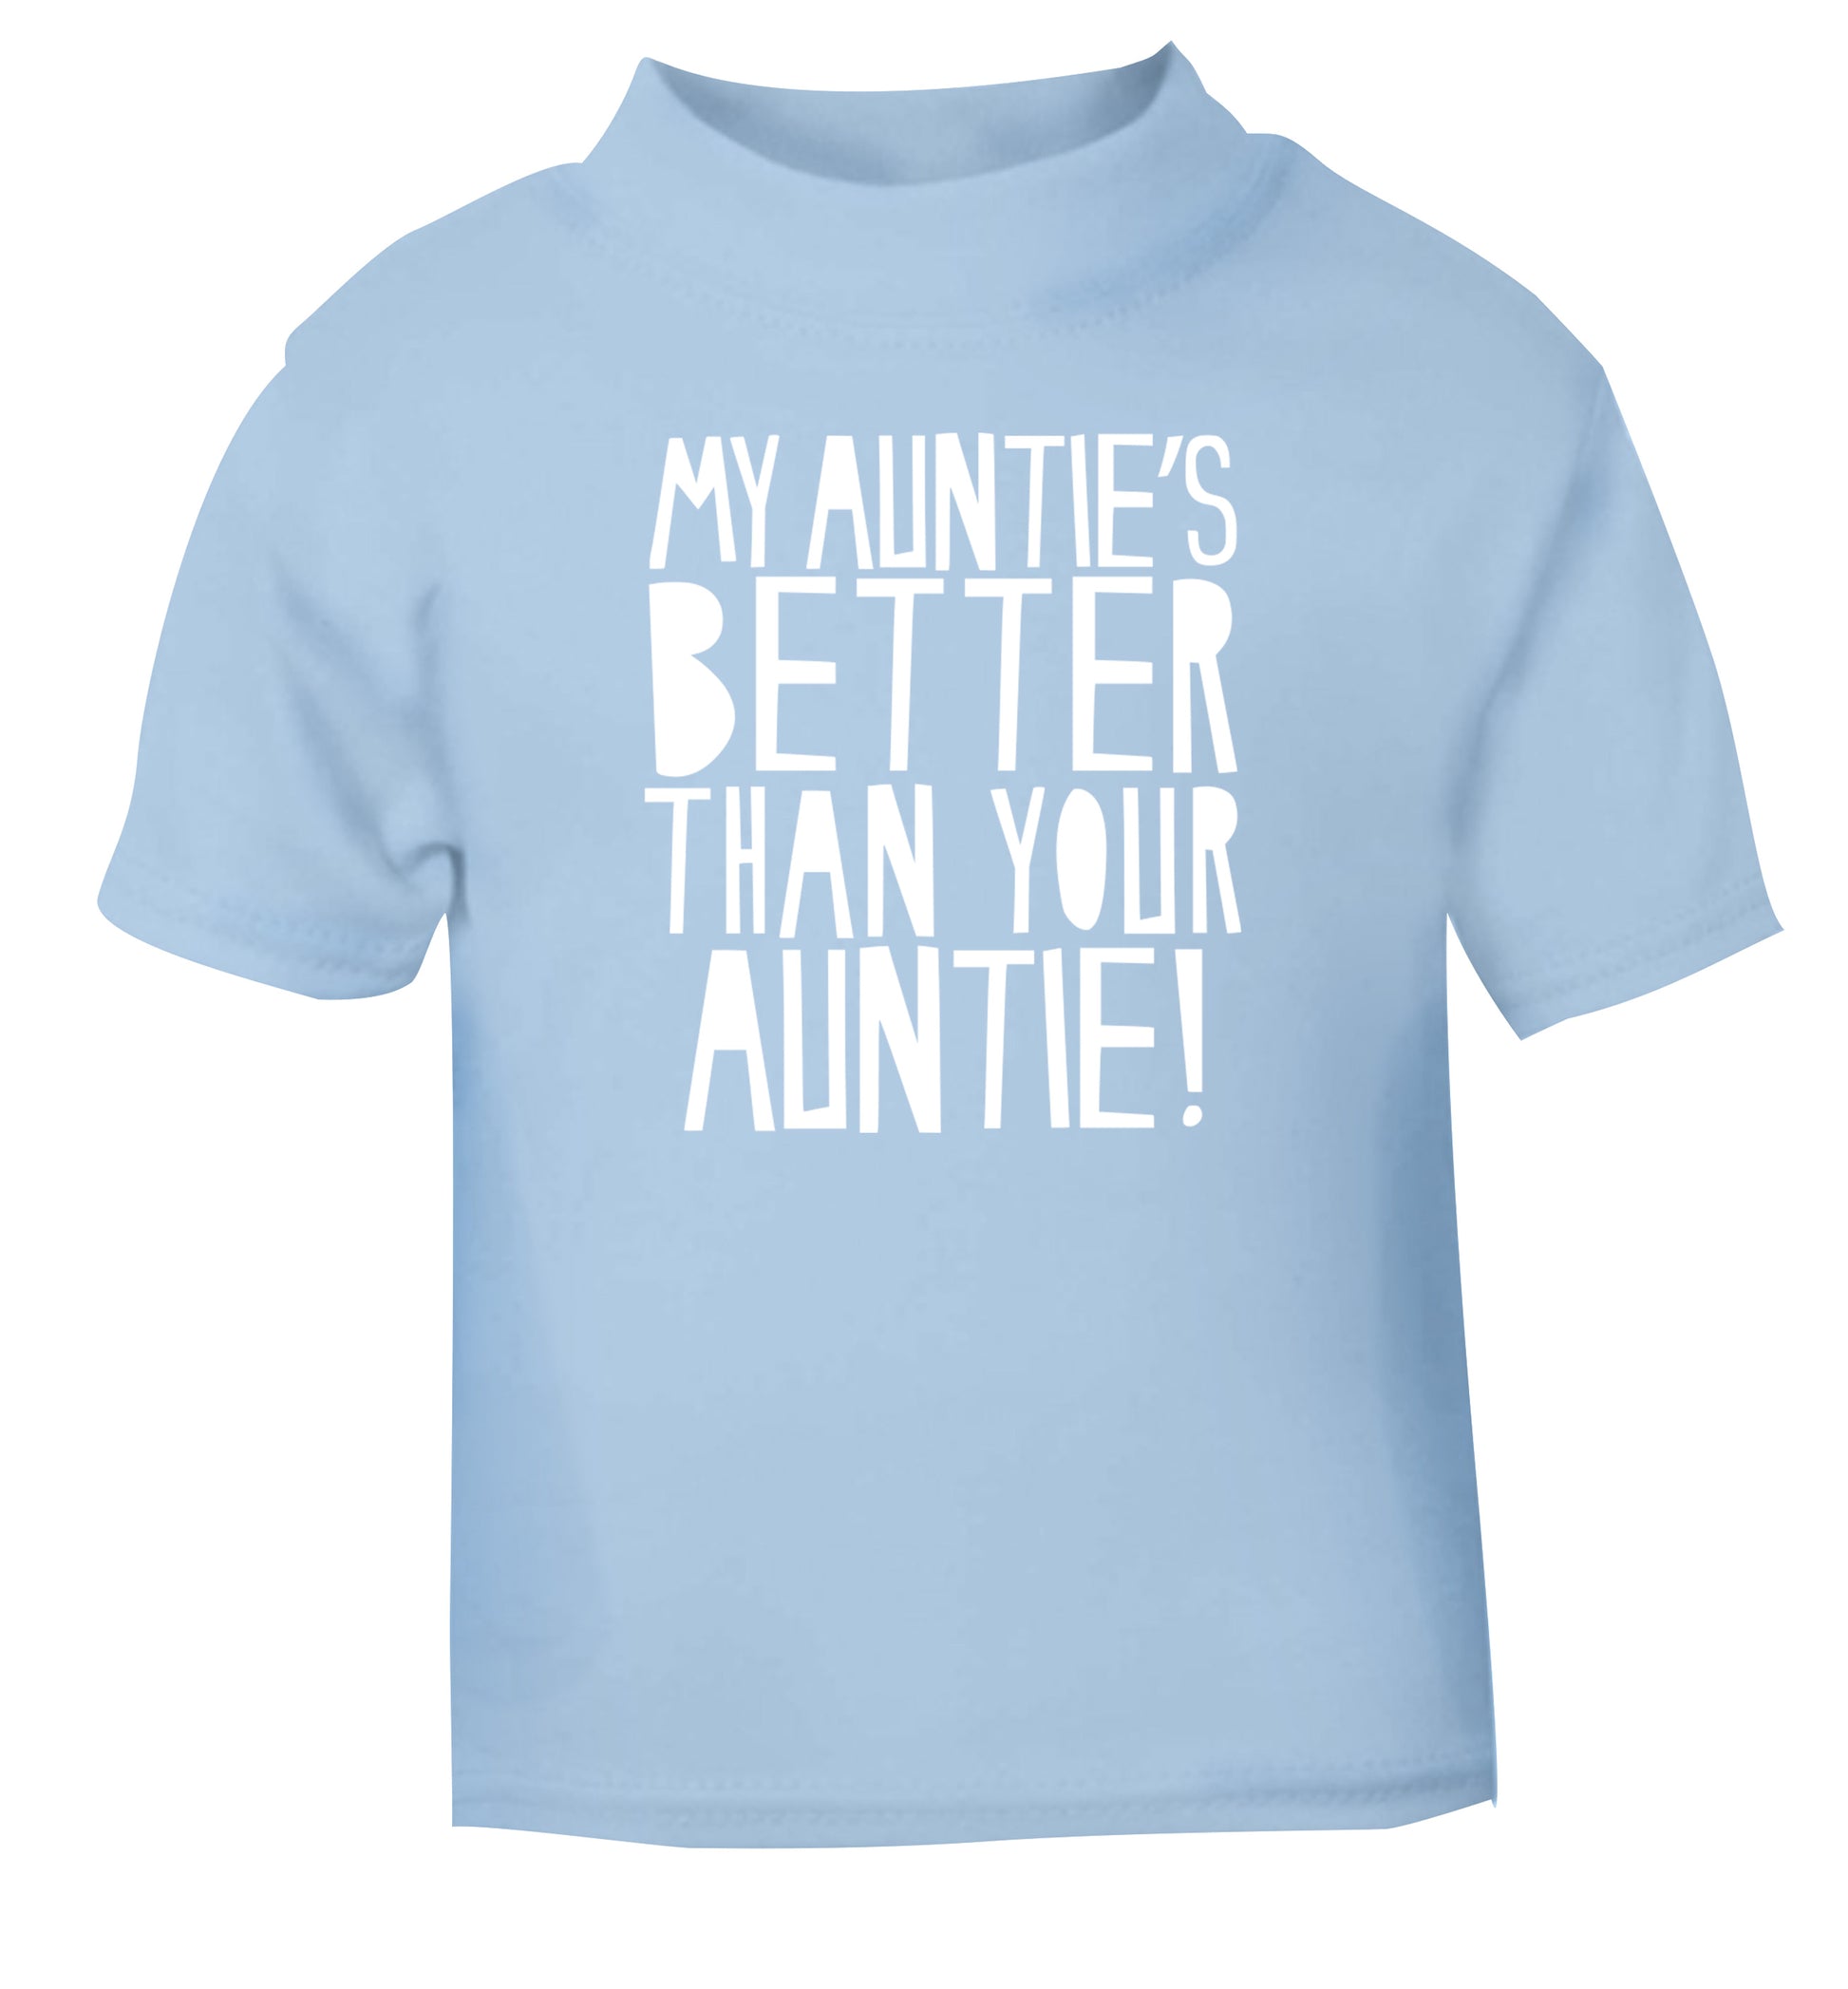 My auntie's better than your auntie light blue Baby Toddler Tshirt 2 Years